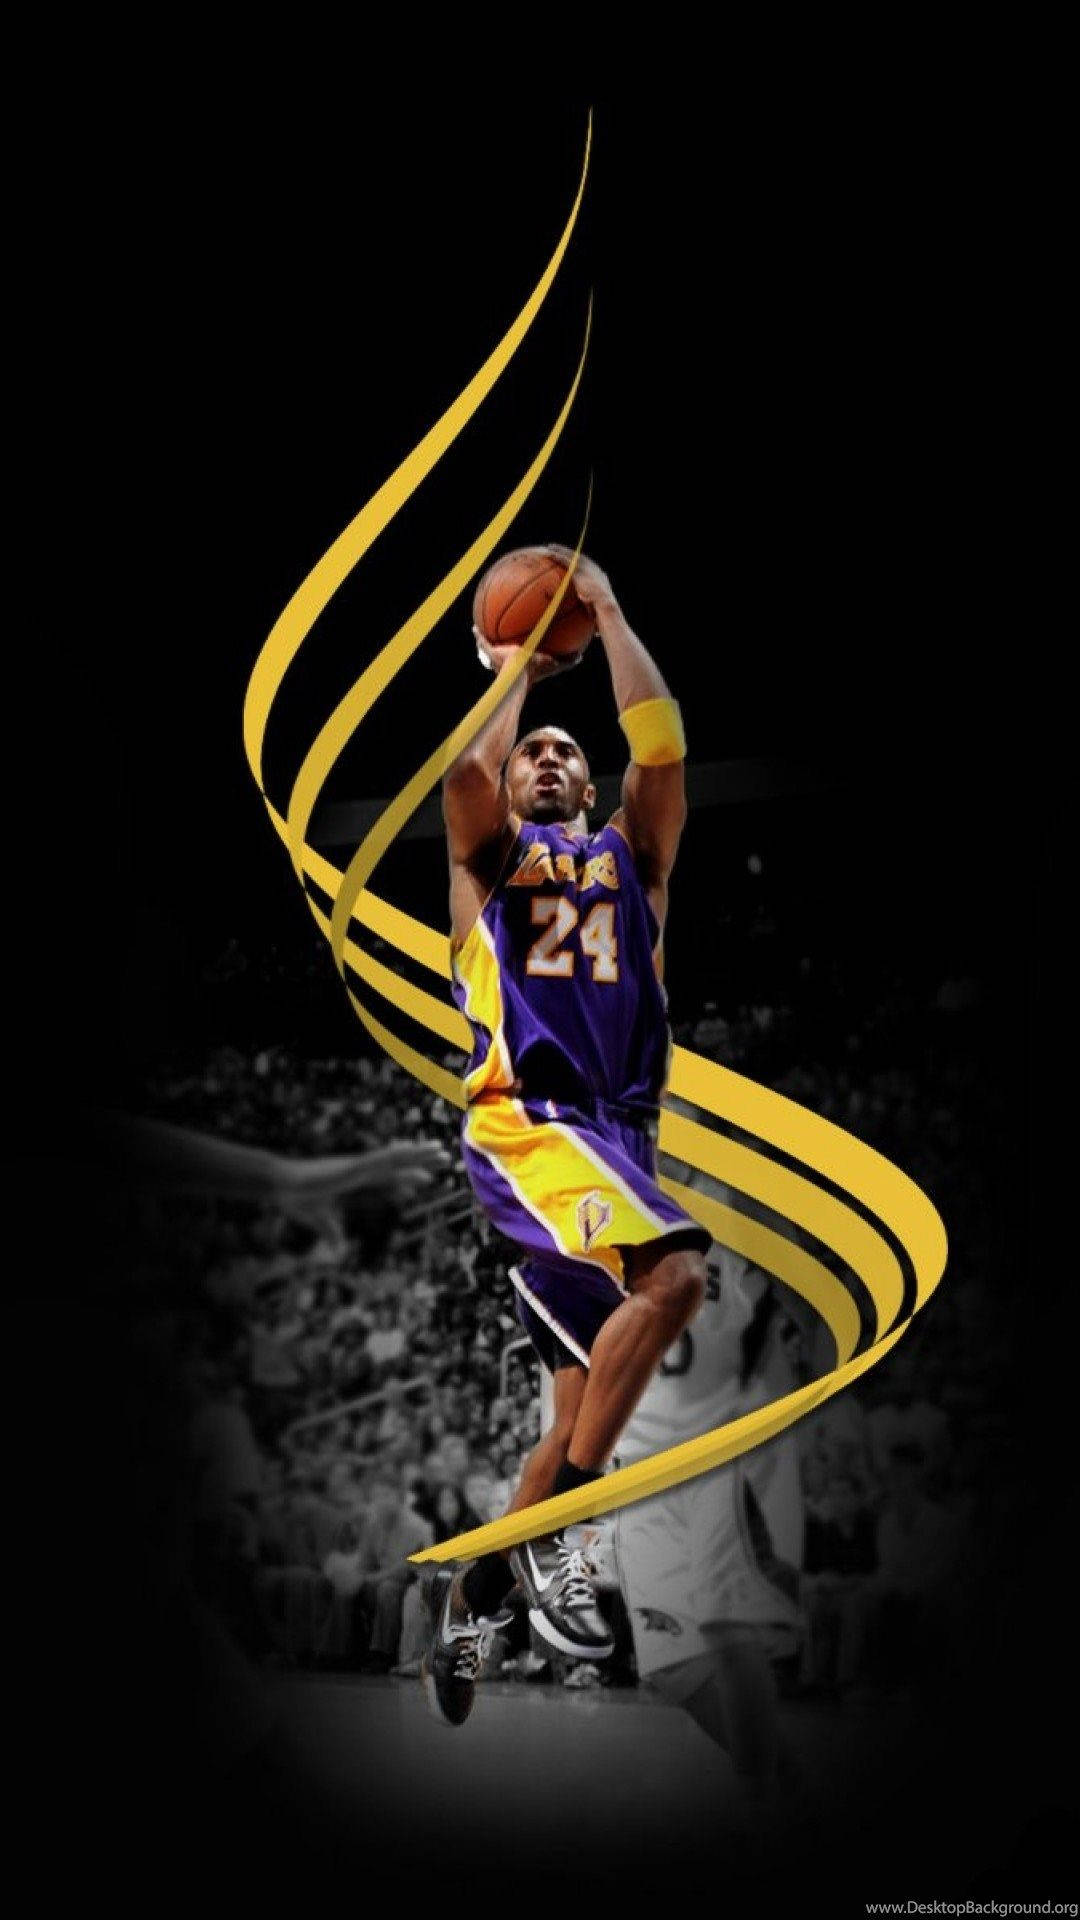 Tags:Los Angeles Lakers Wallpapers Album-Page1 | 10wallpaper.com